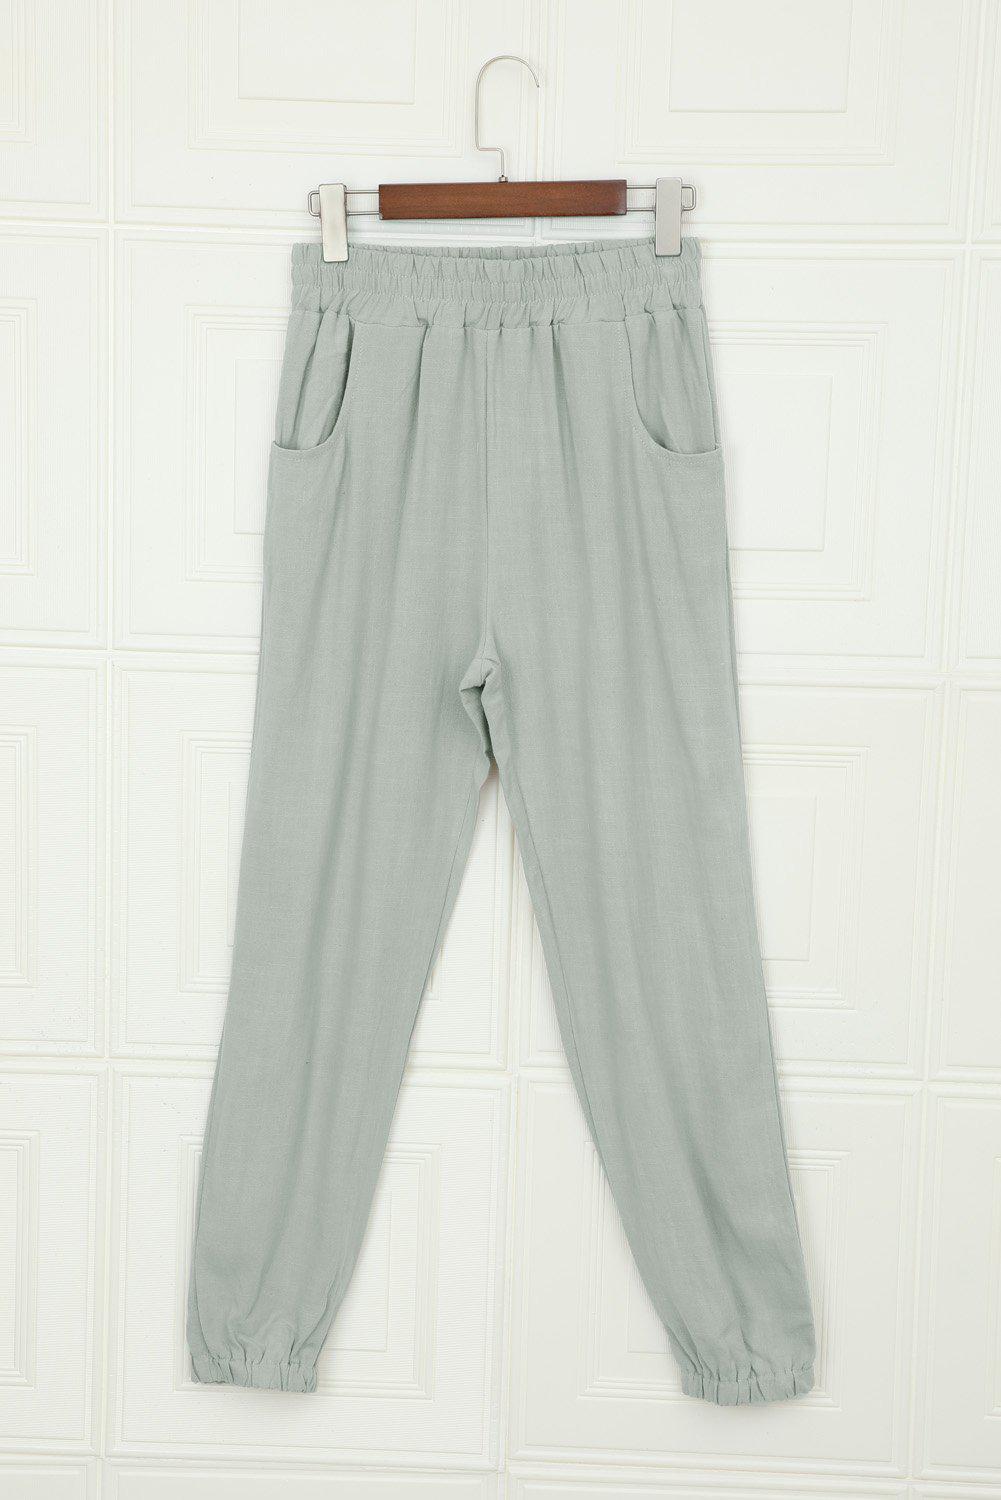 Linen Pocketed Elastic Waistband Joggers-BOTTOMS SML-[Adult]-[Female]-Blue Zone Planet